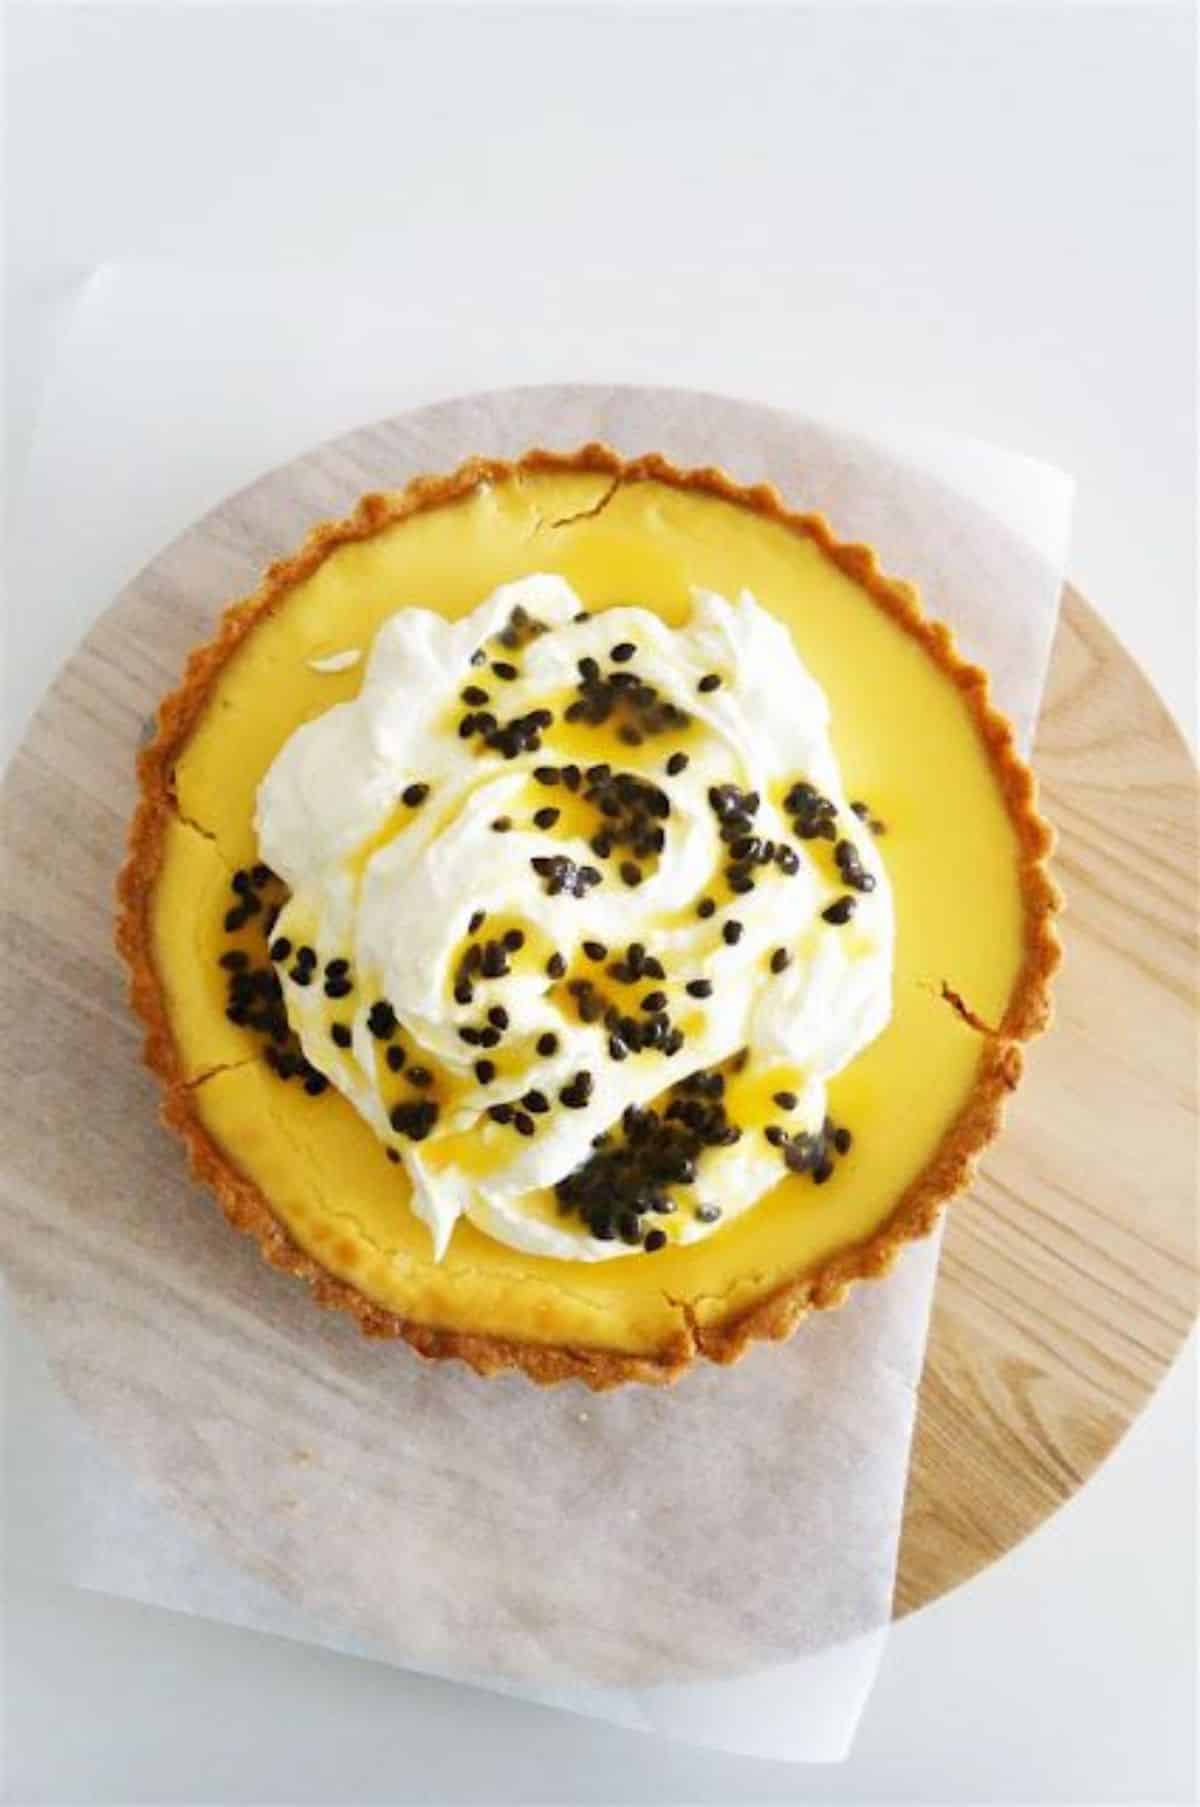 Flavorful passion fruit tart with orange cream on  a wooden tray.